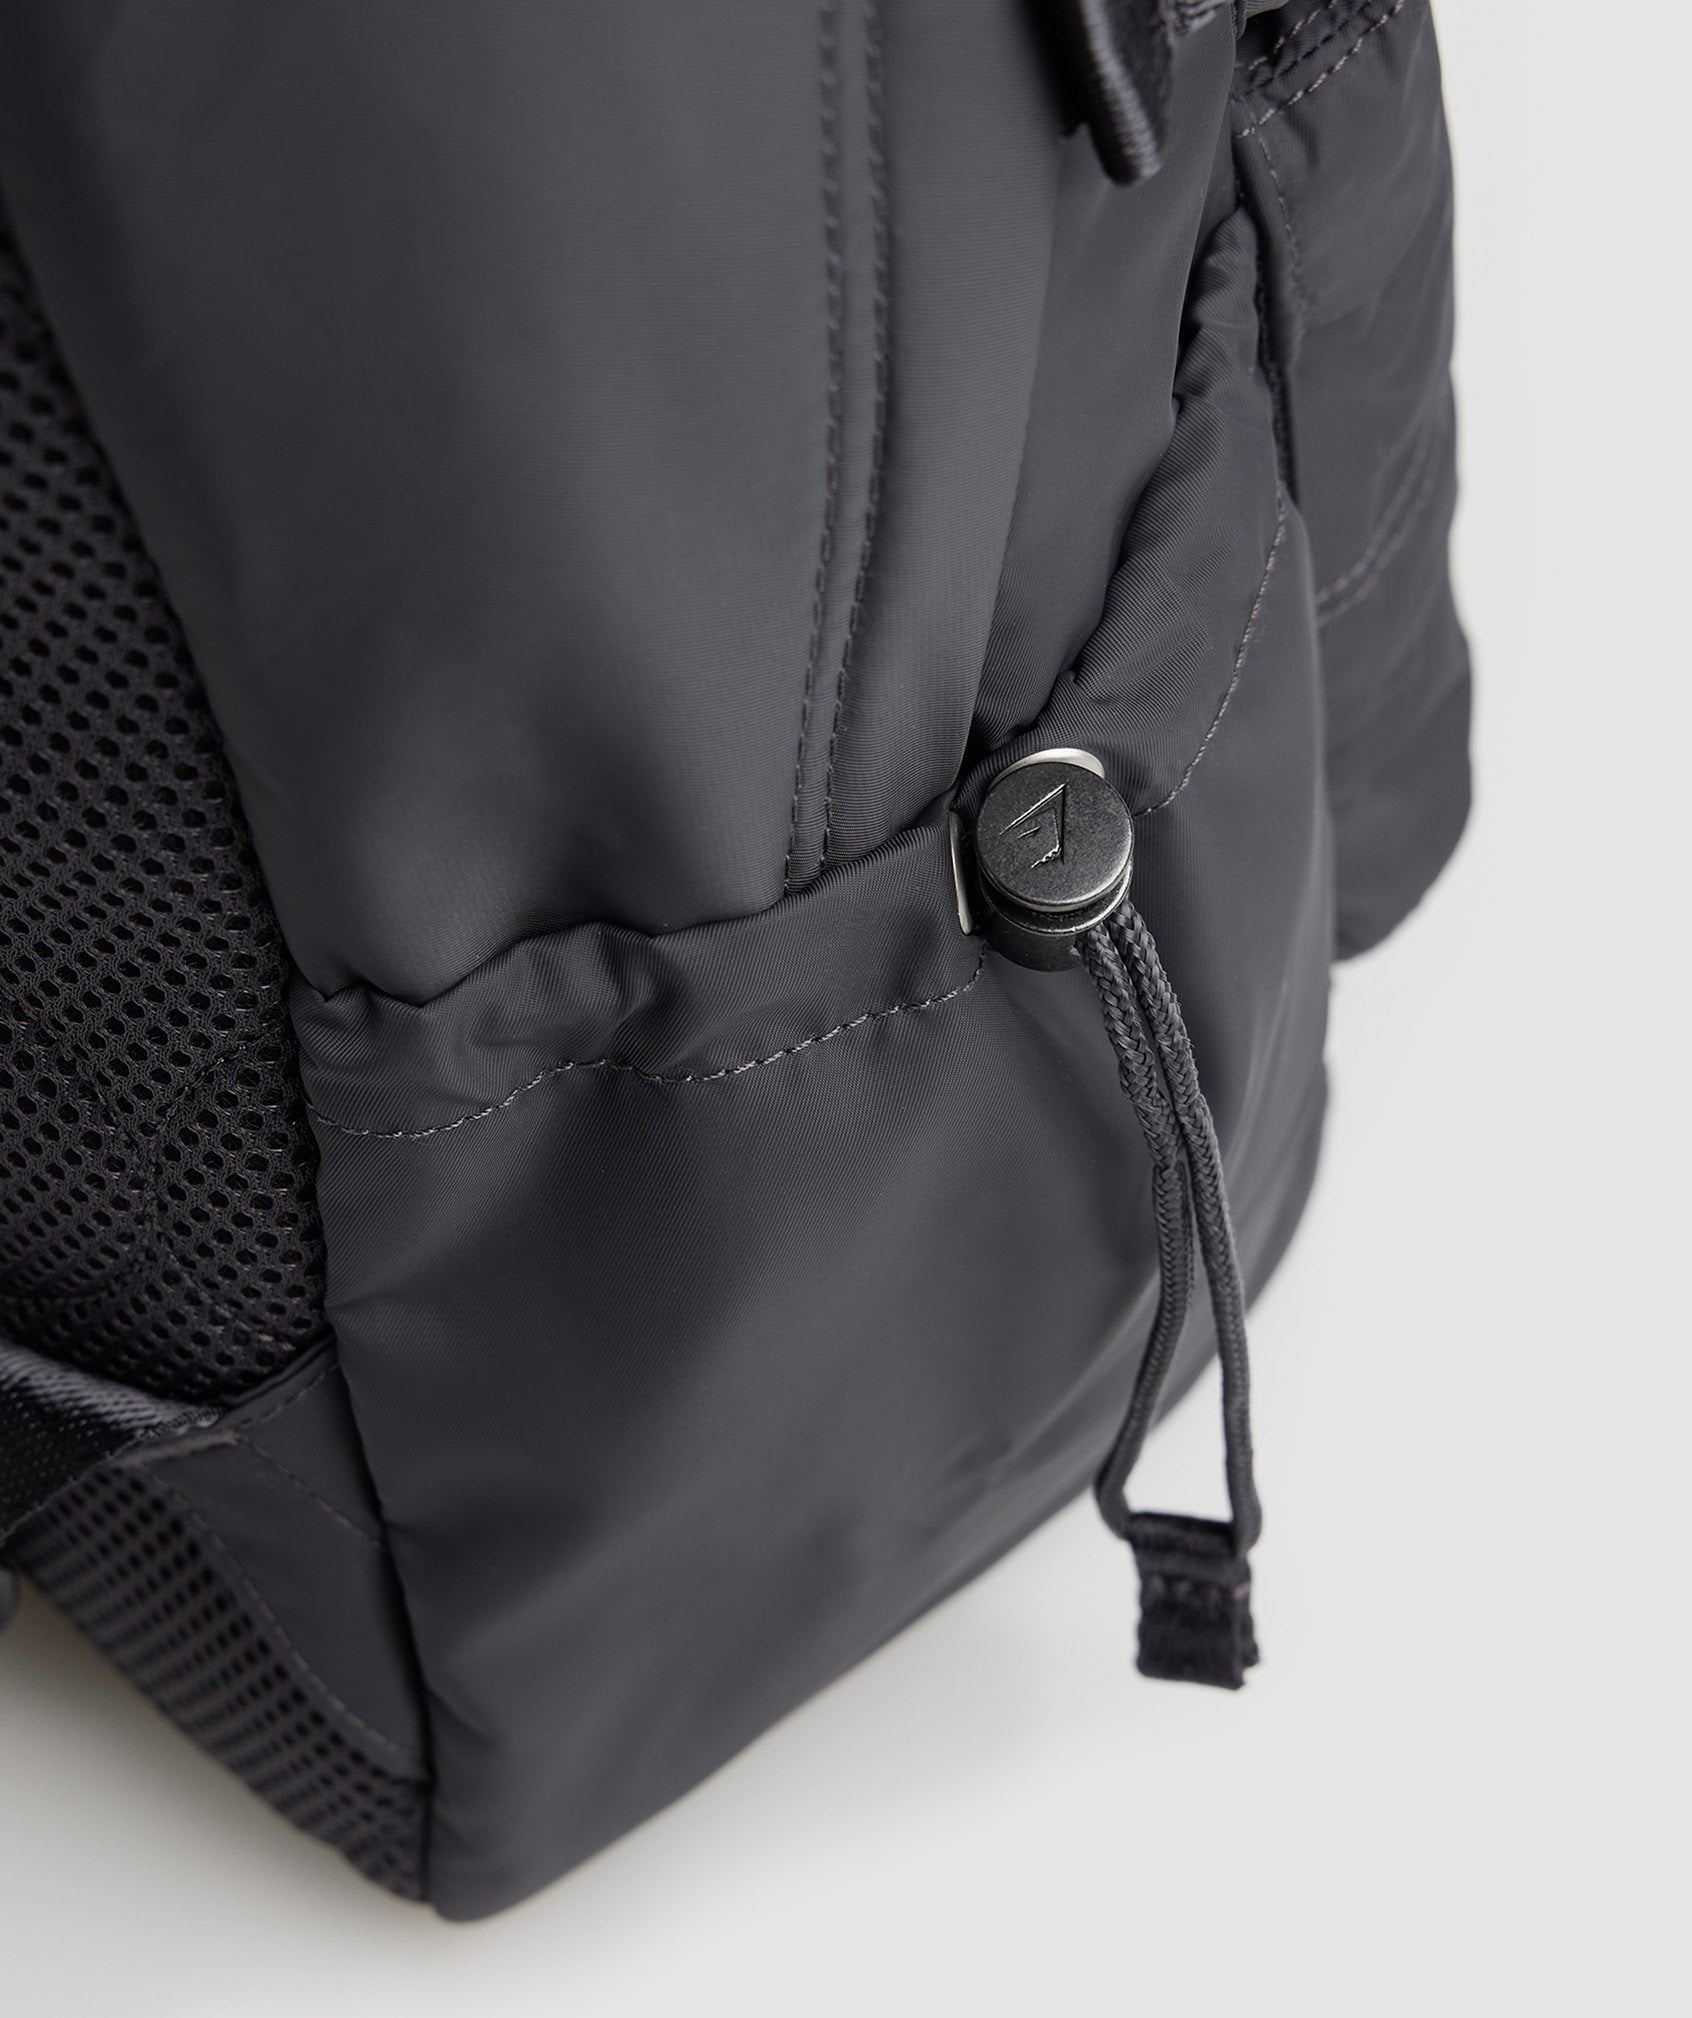 Premium Lifestyle Backpack in Onyx Grey - view 6